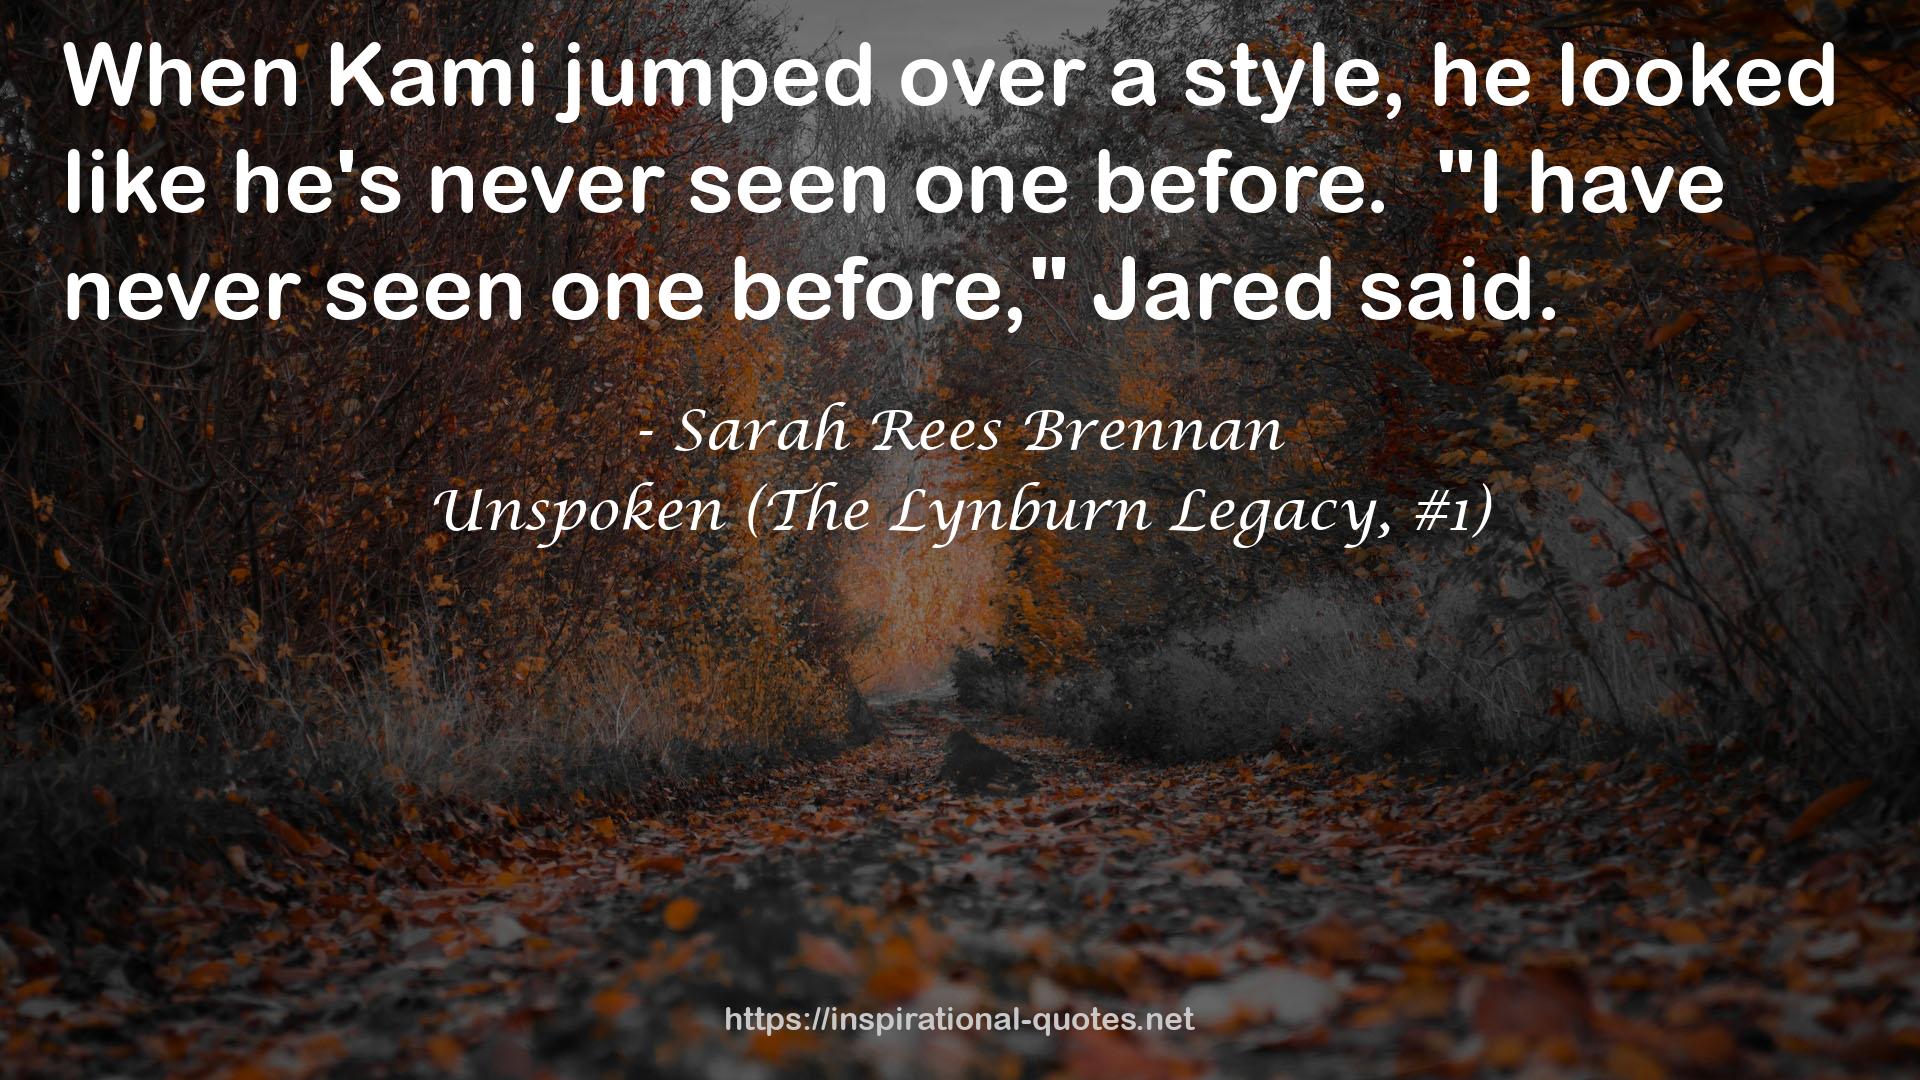 Unspoken (The Lynburn Legacy, #1) QUOTES